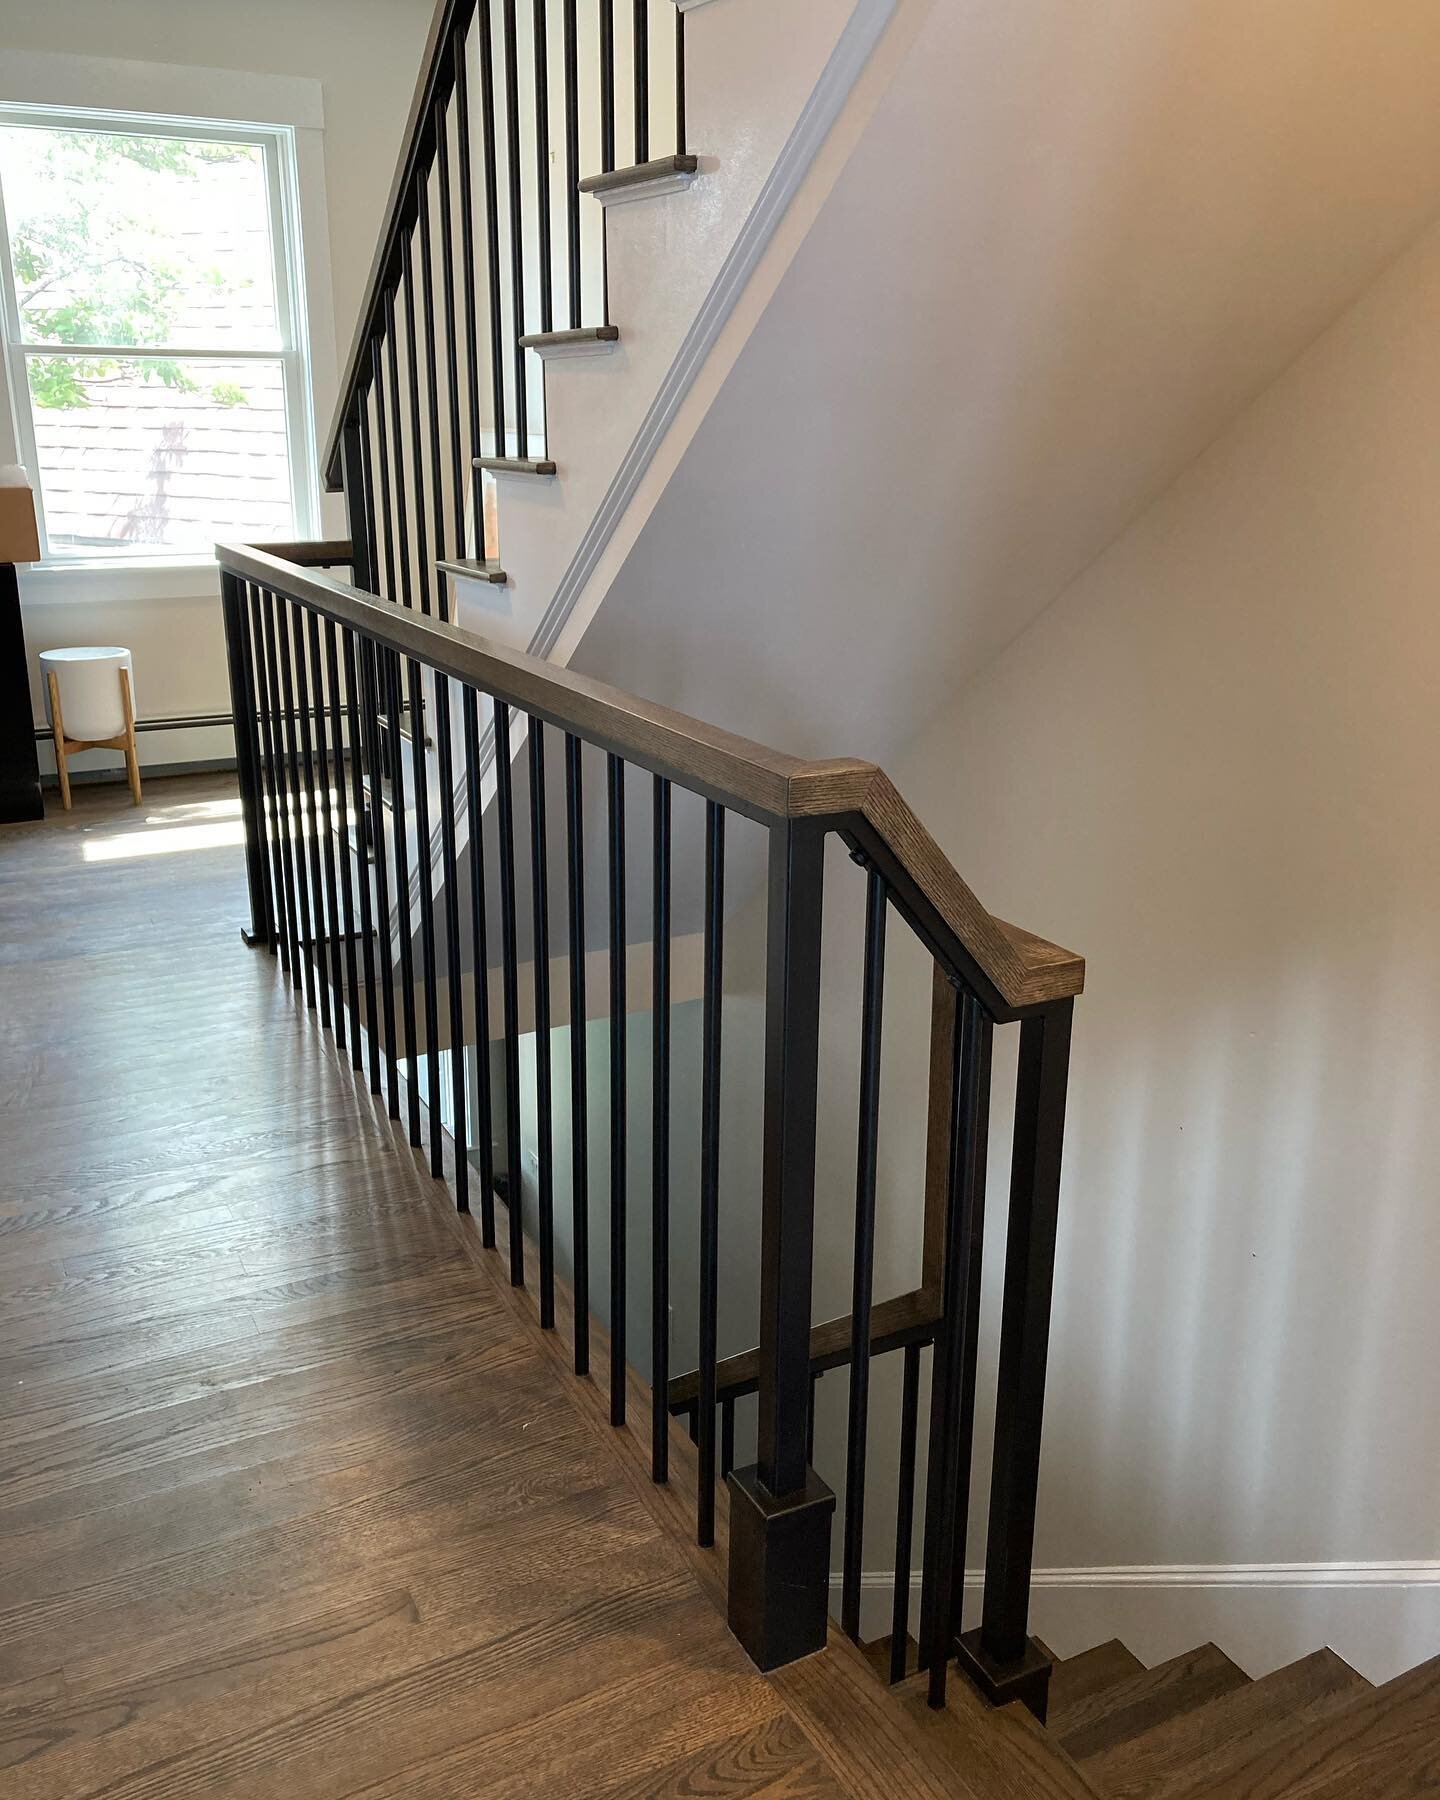 Handrail completed in south portland. Tough build. Had to use existing holes in the flooring from the original wood railing, insert matching diameter rods and weld all parts on site. Wood cap wraps around the top, stained to match tread color. Great 